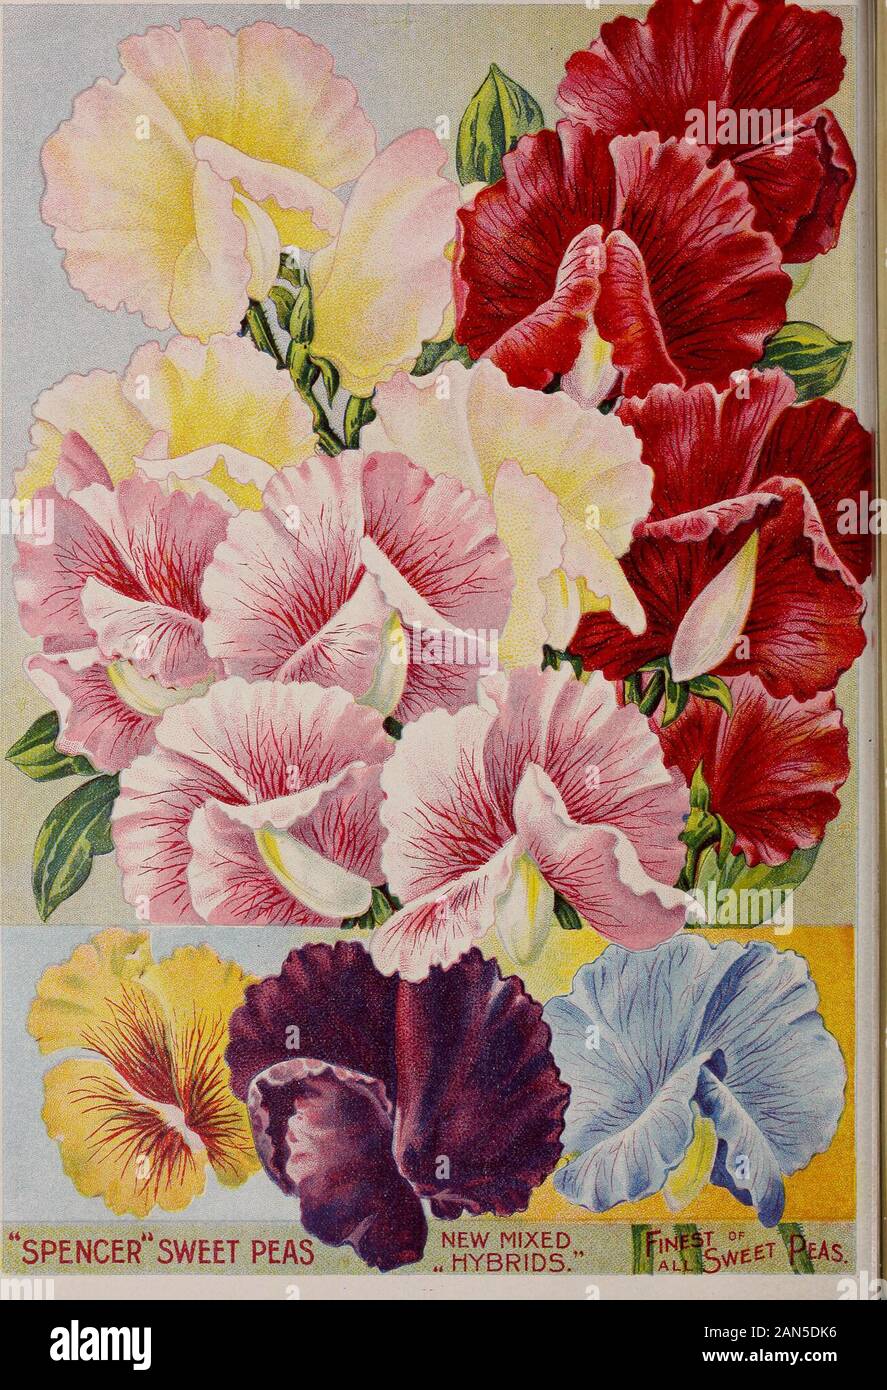 Childs' combination catalogue for 1910 : flower seeds vegetable seeds summer bulbs hardy bulbs and plants house plants shrubs new fruits and dutch or full bulbs . SPRING CATALOGUE OF SEEDS, BULBS AND PLANTS FOR 1910. 21 SWeet Peas. Our Great Collection of Grand New Varieties. One of the dear old flowers that will never go out of fash-ion. Everyone who has a yard ought to grow quantities ofthis sweetest of all flowers, that is not only a beautiful low-growing vine for gardens and decoration, but one of the mostuseful of all in furnishing material for vases, bouquets, andall 3ut flower work. Pla Stock Photo